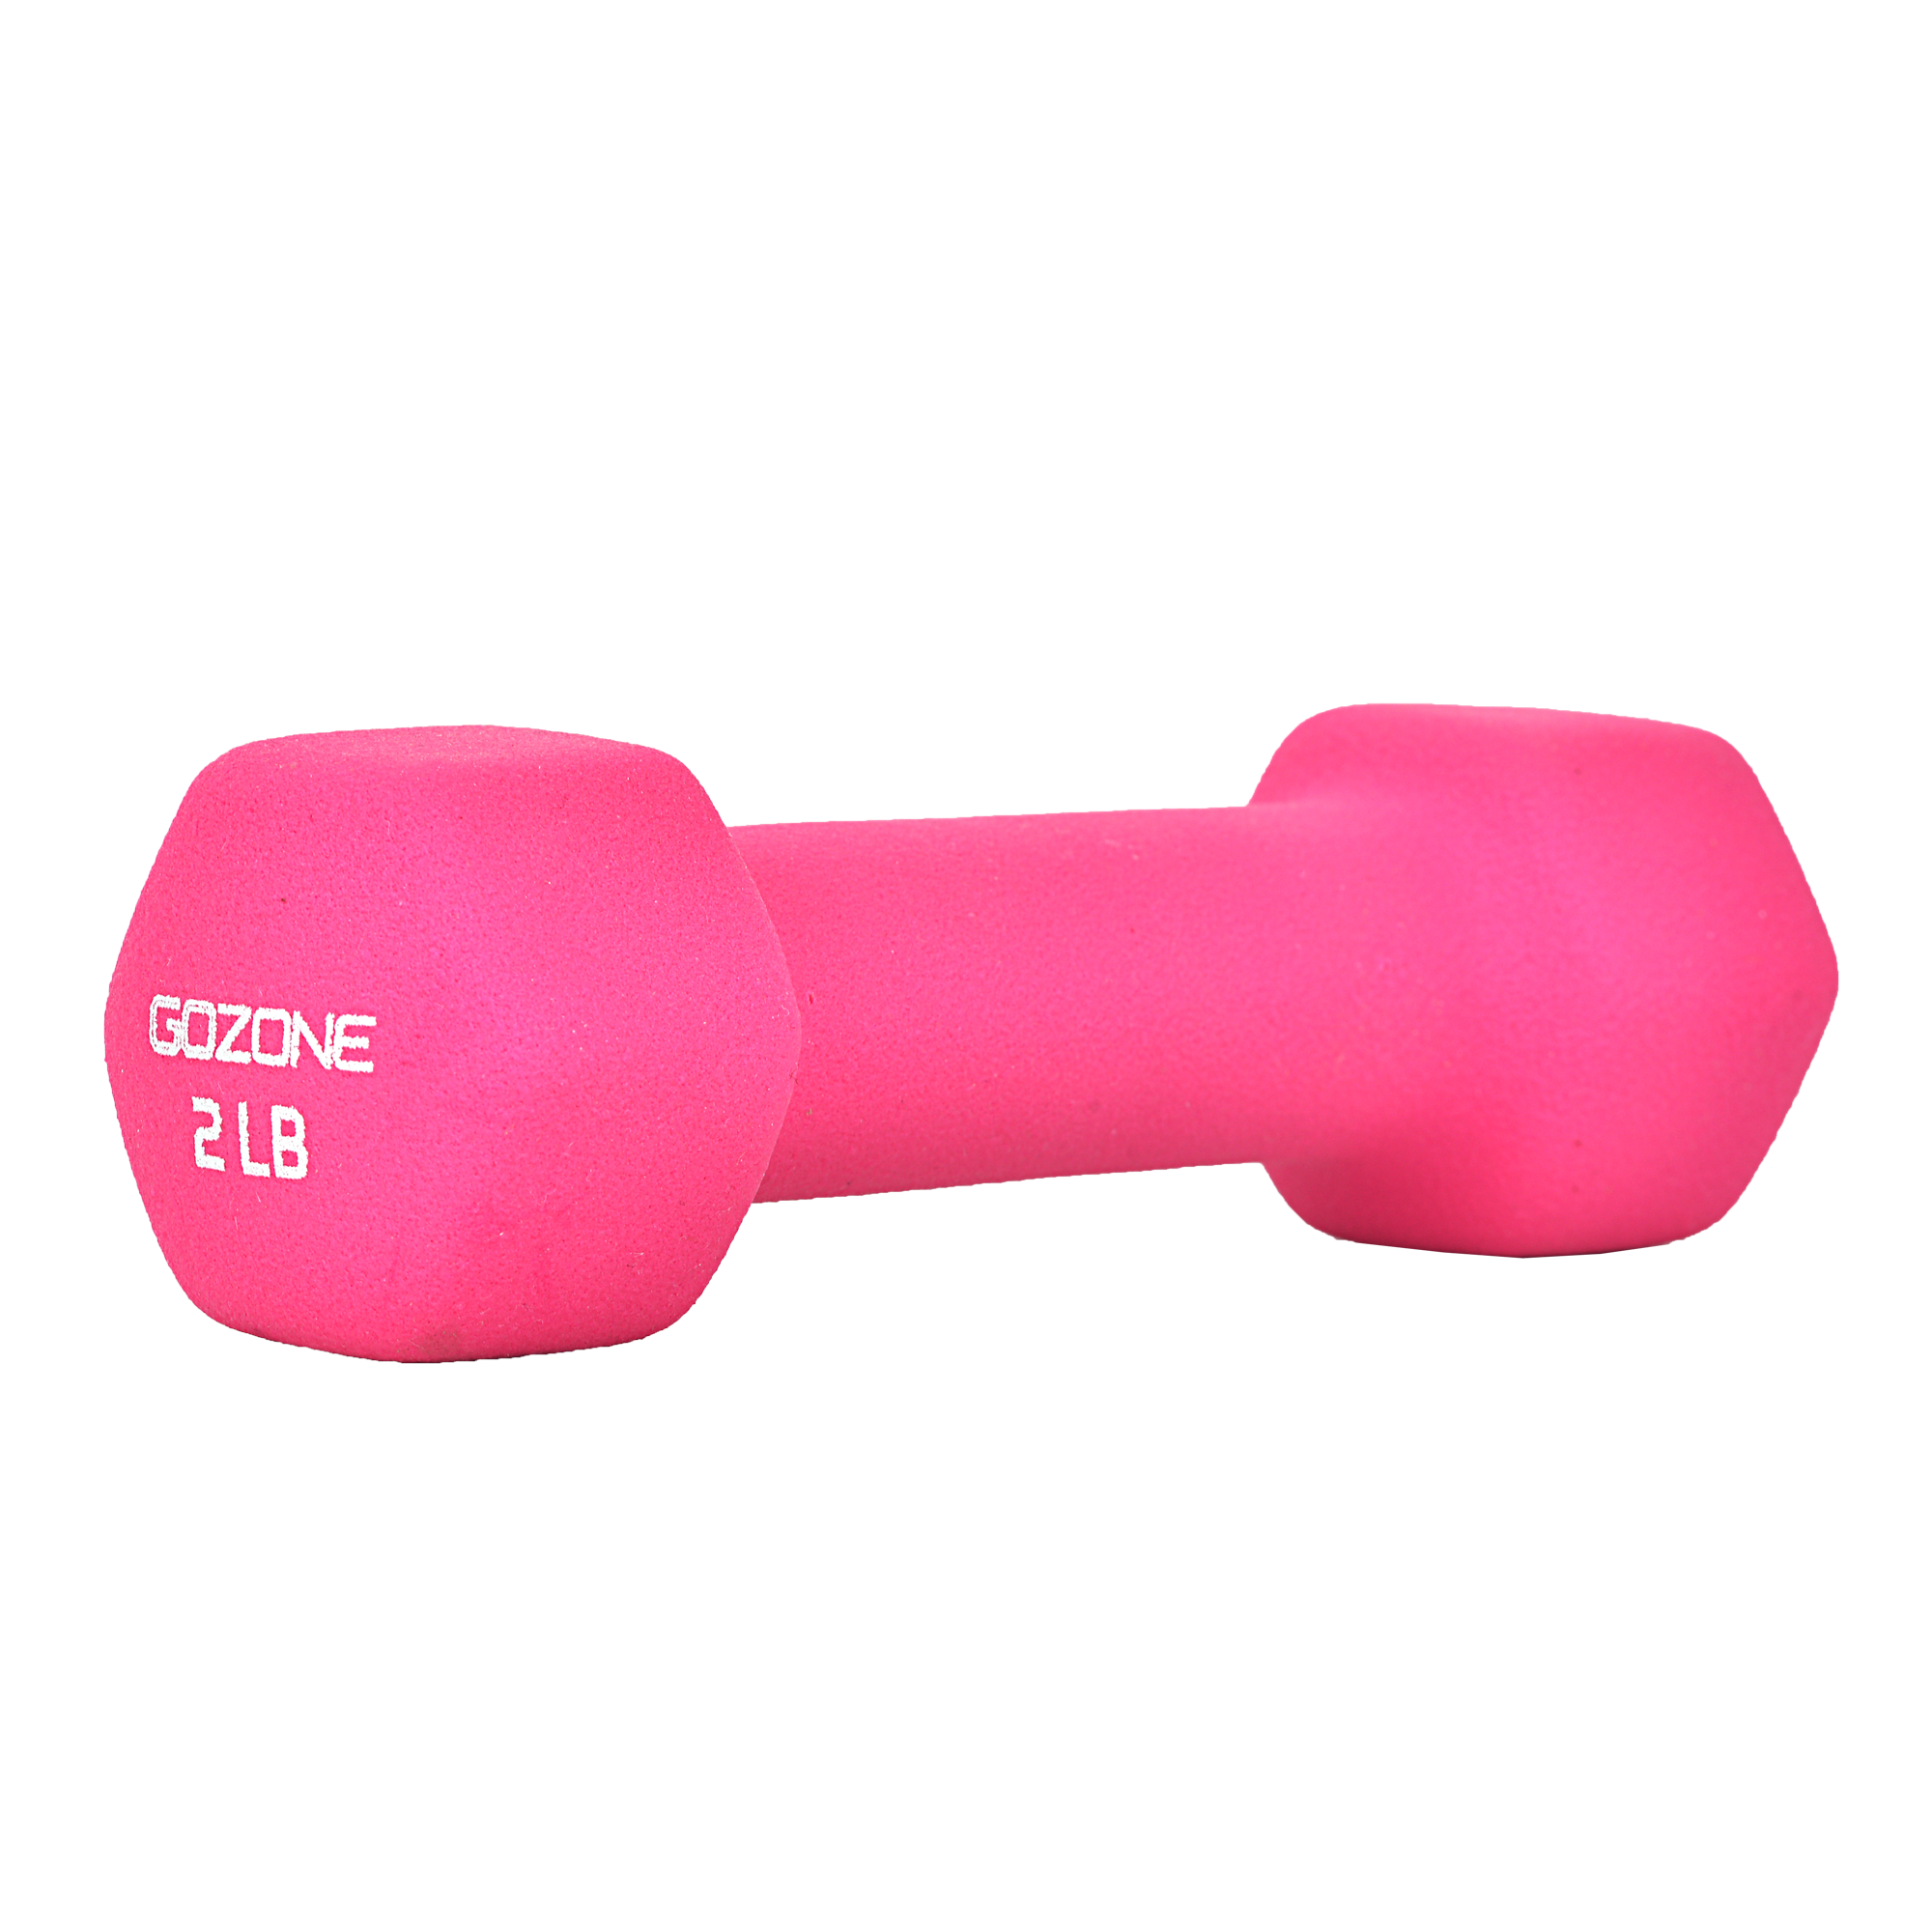 Premium Photo  Pink fitness exercise equipment dumbbell weight in duotone  style 3d rendering